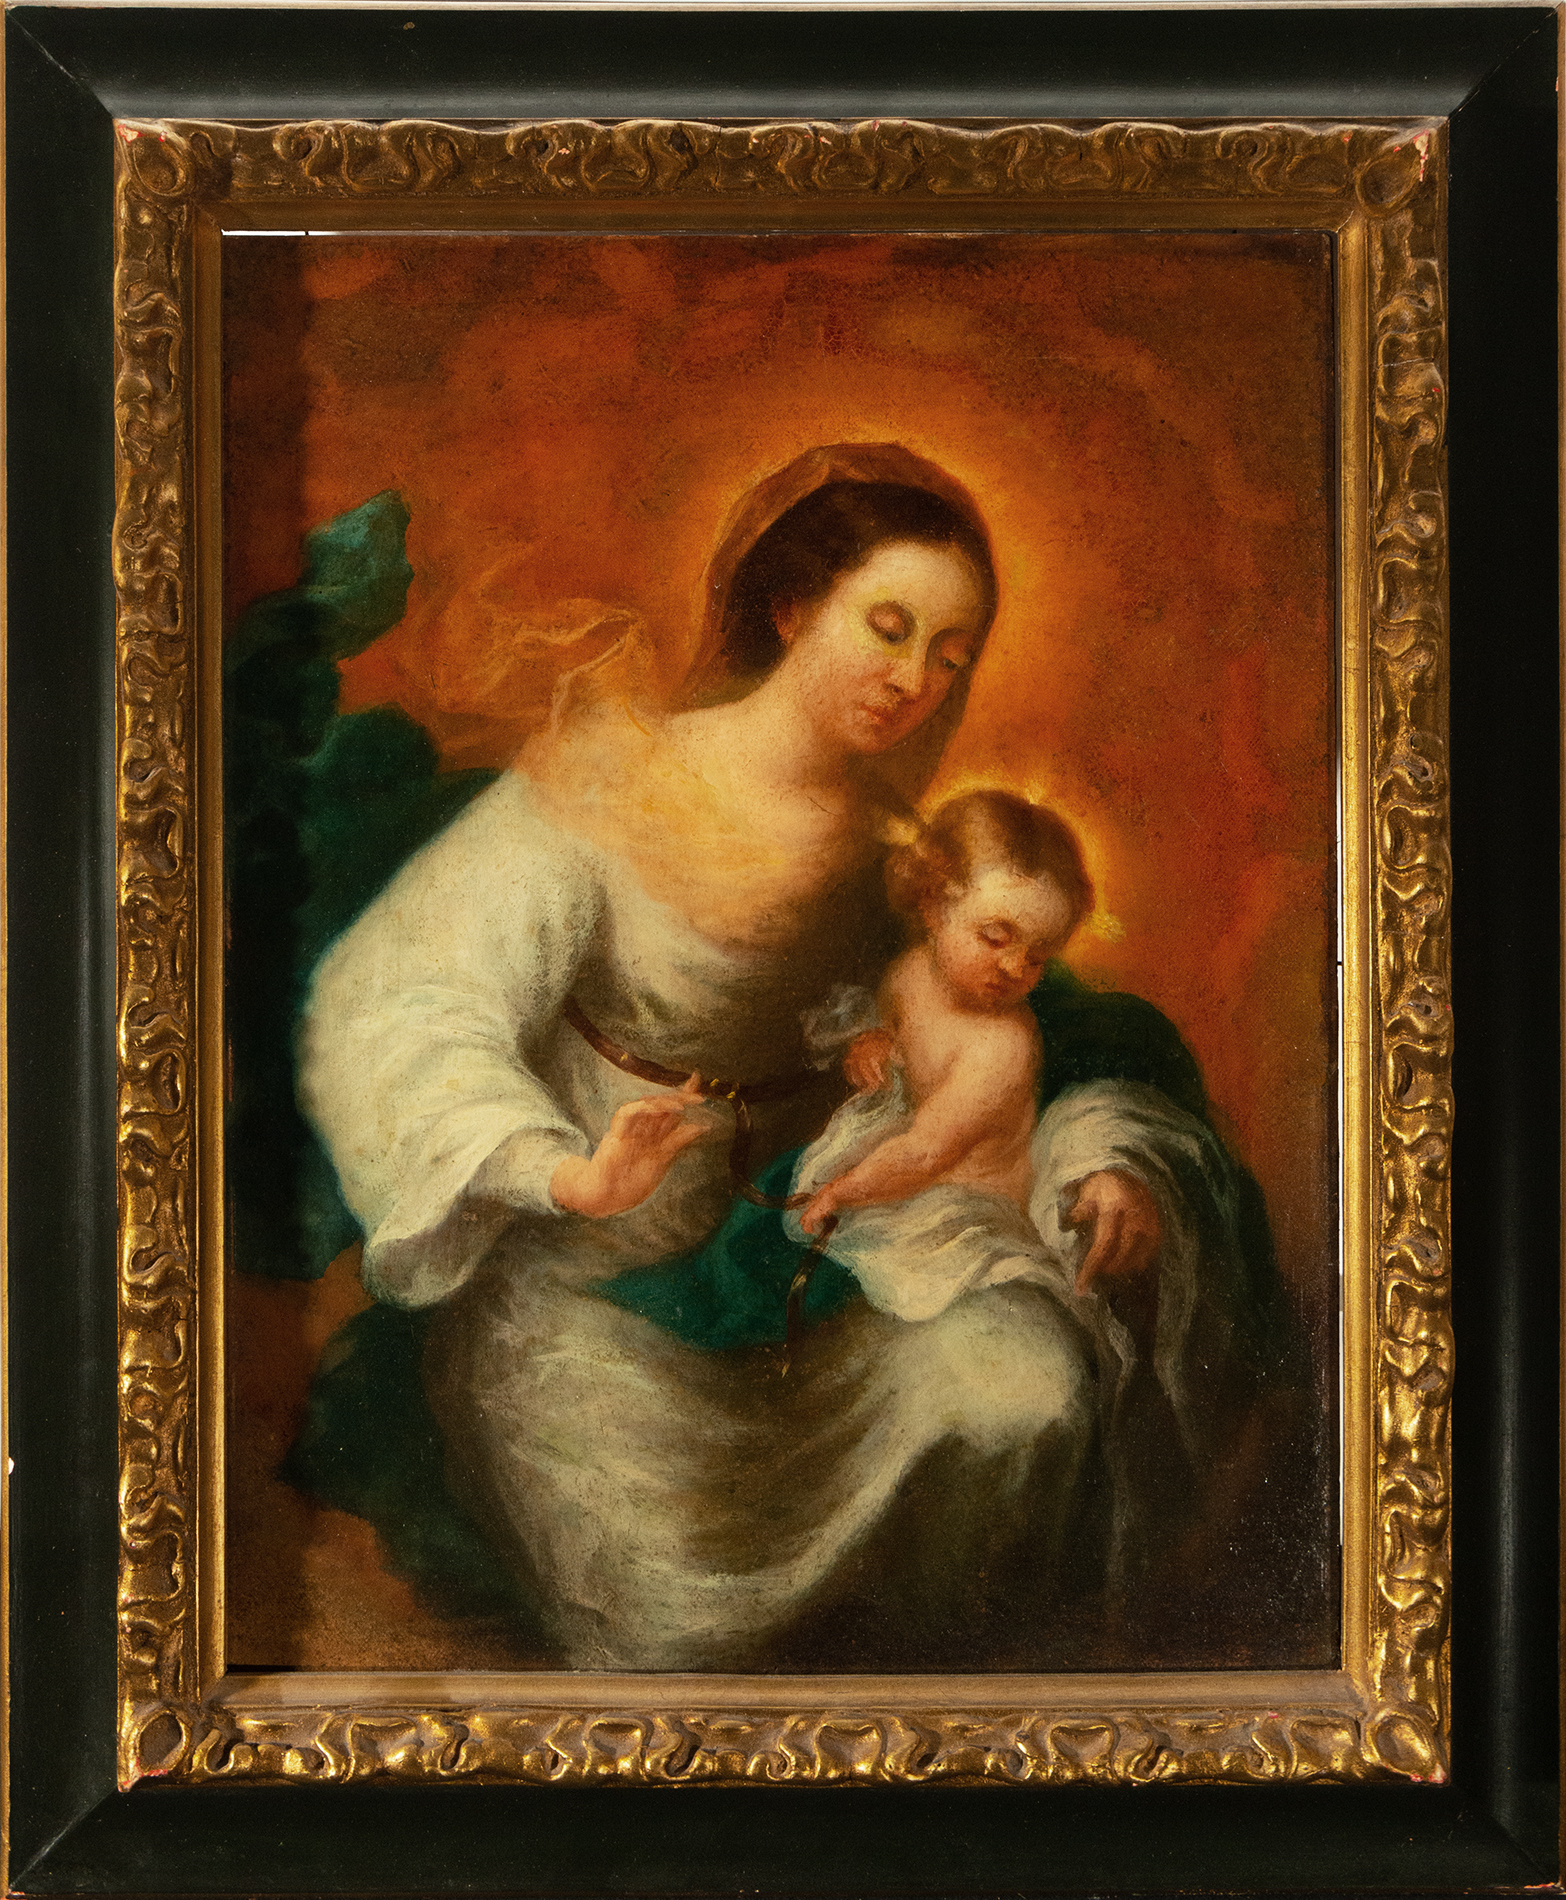 Virgin with Child in Arms, following models by Bartolomé Esteban Murillo, 19th century